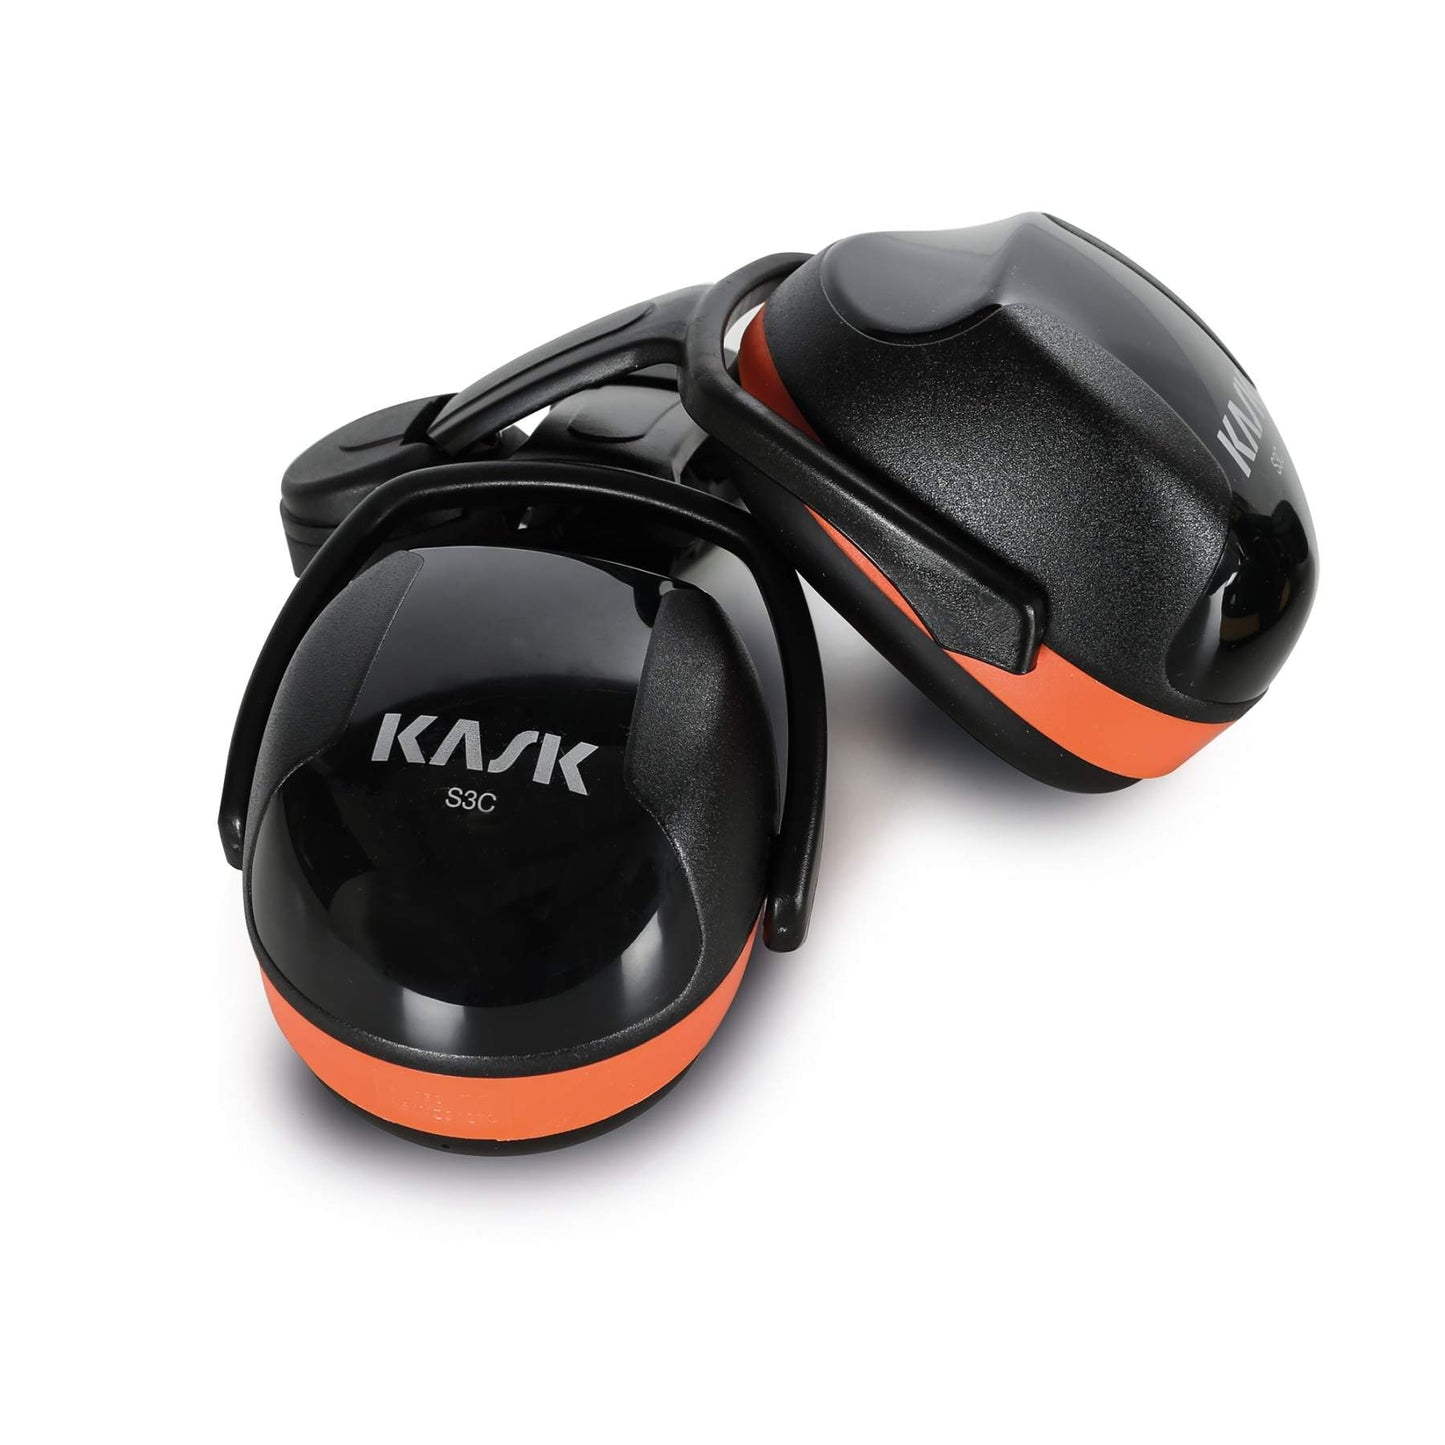 HEARING PROTECTION- SC3 – Kask